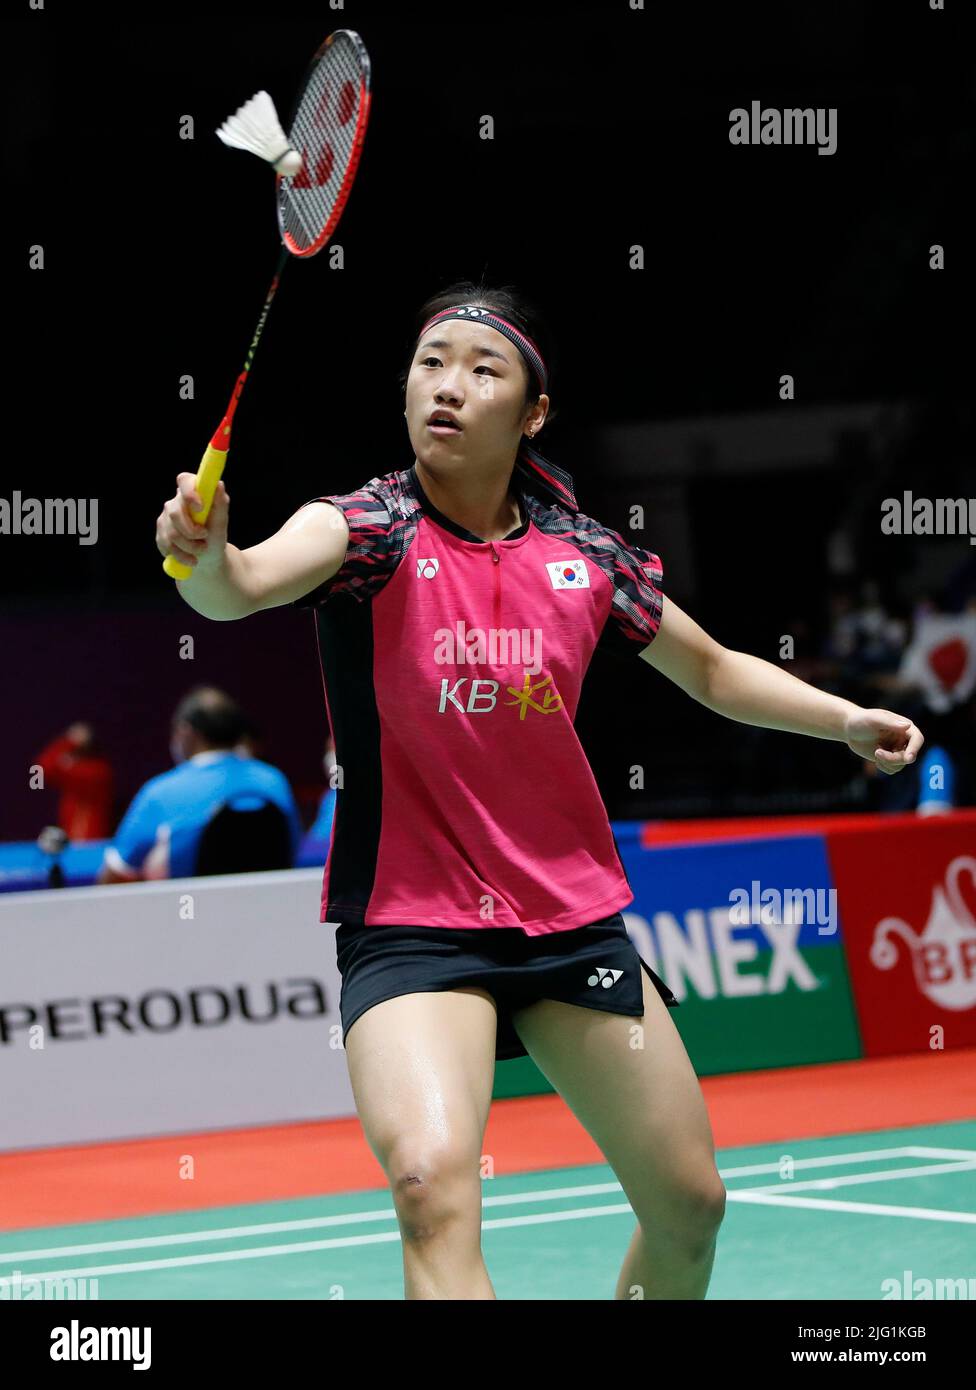 An Se Young of Korea competes against Iris Wang of United States of America during the Womens Single round two match of the Perodua Malaysia Masters 2022 at Axiata Arena, Bukit Jalil